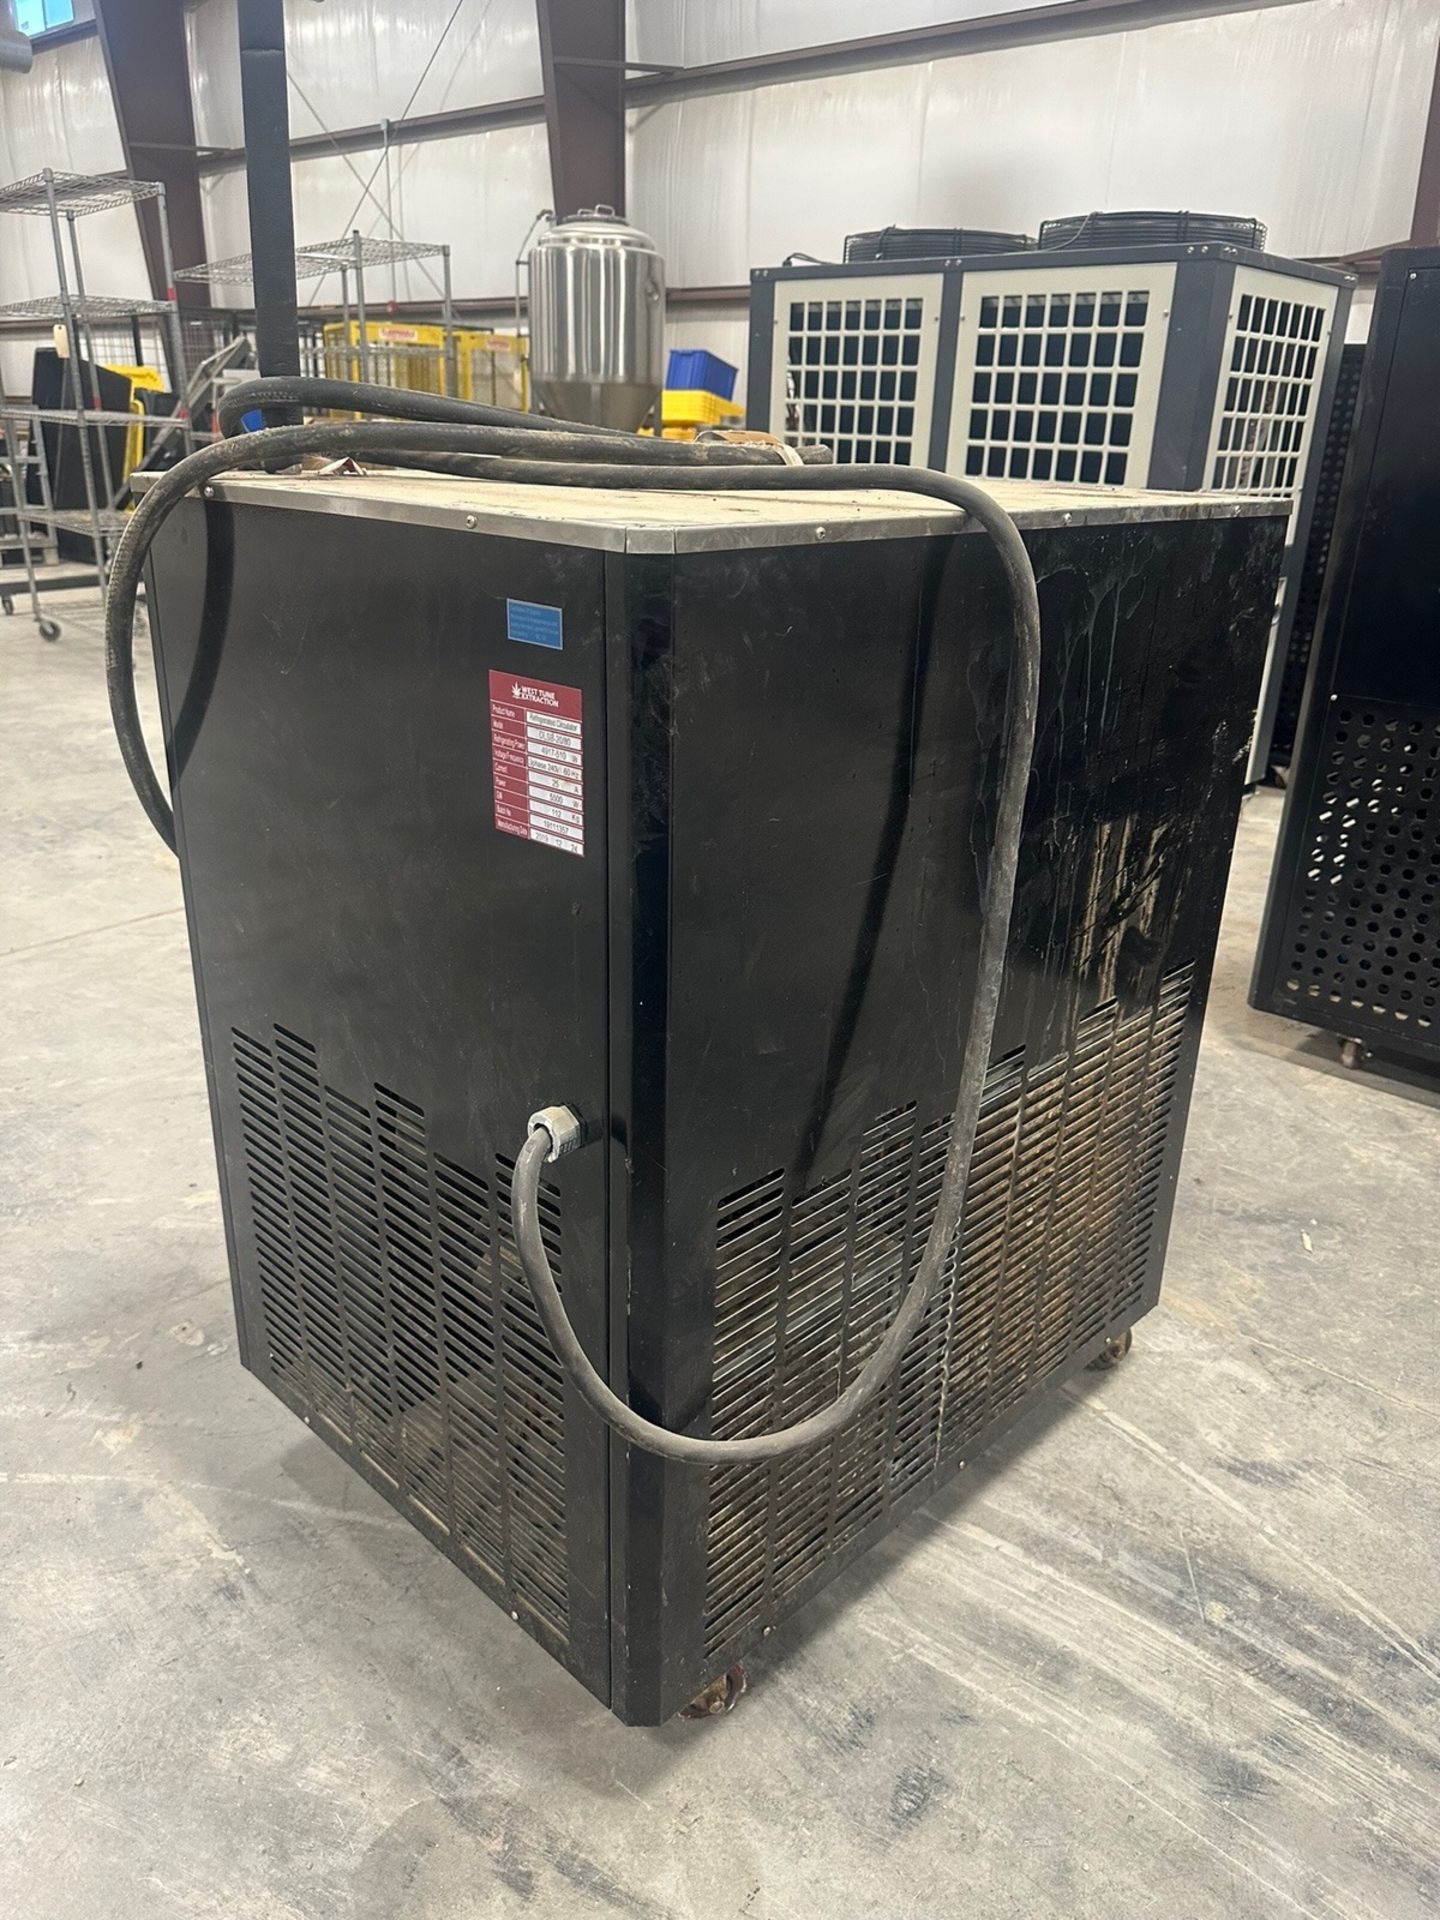 West Tune Extraction Refrigerated Circulator, Model, DLSB-20/80, Year 201 | Rig Fee $125